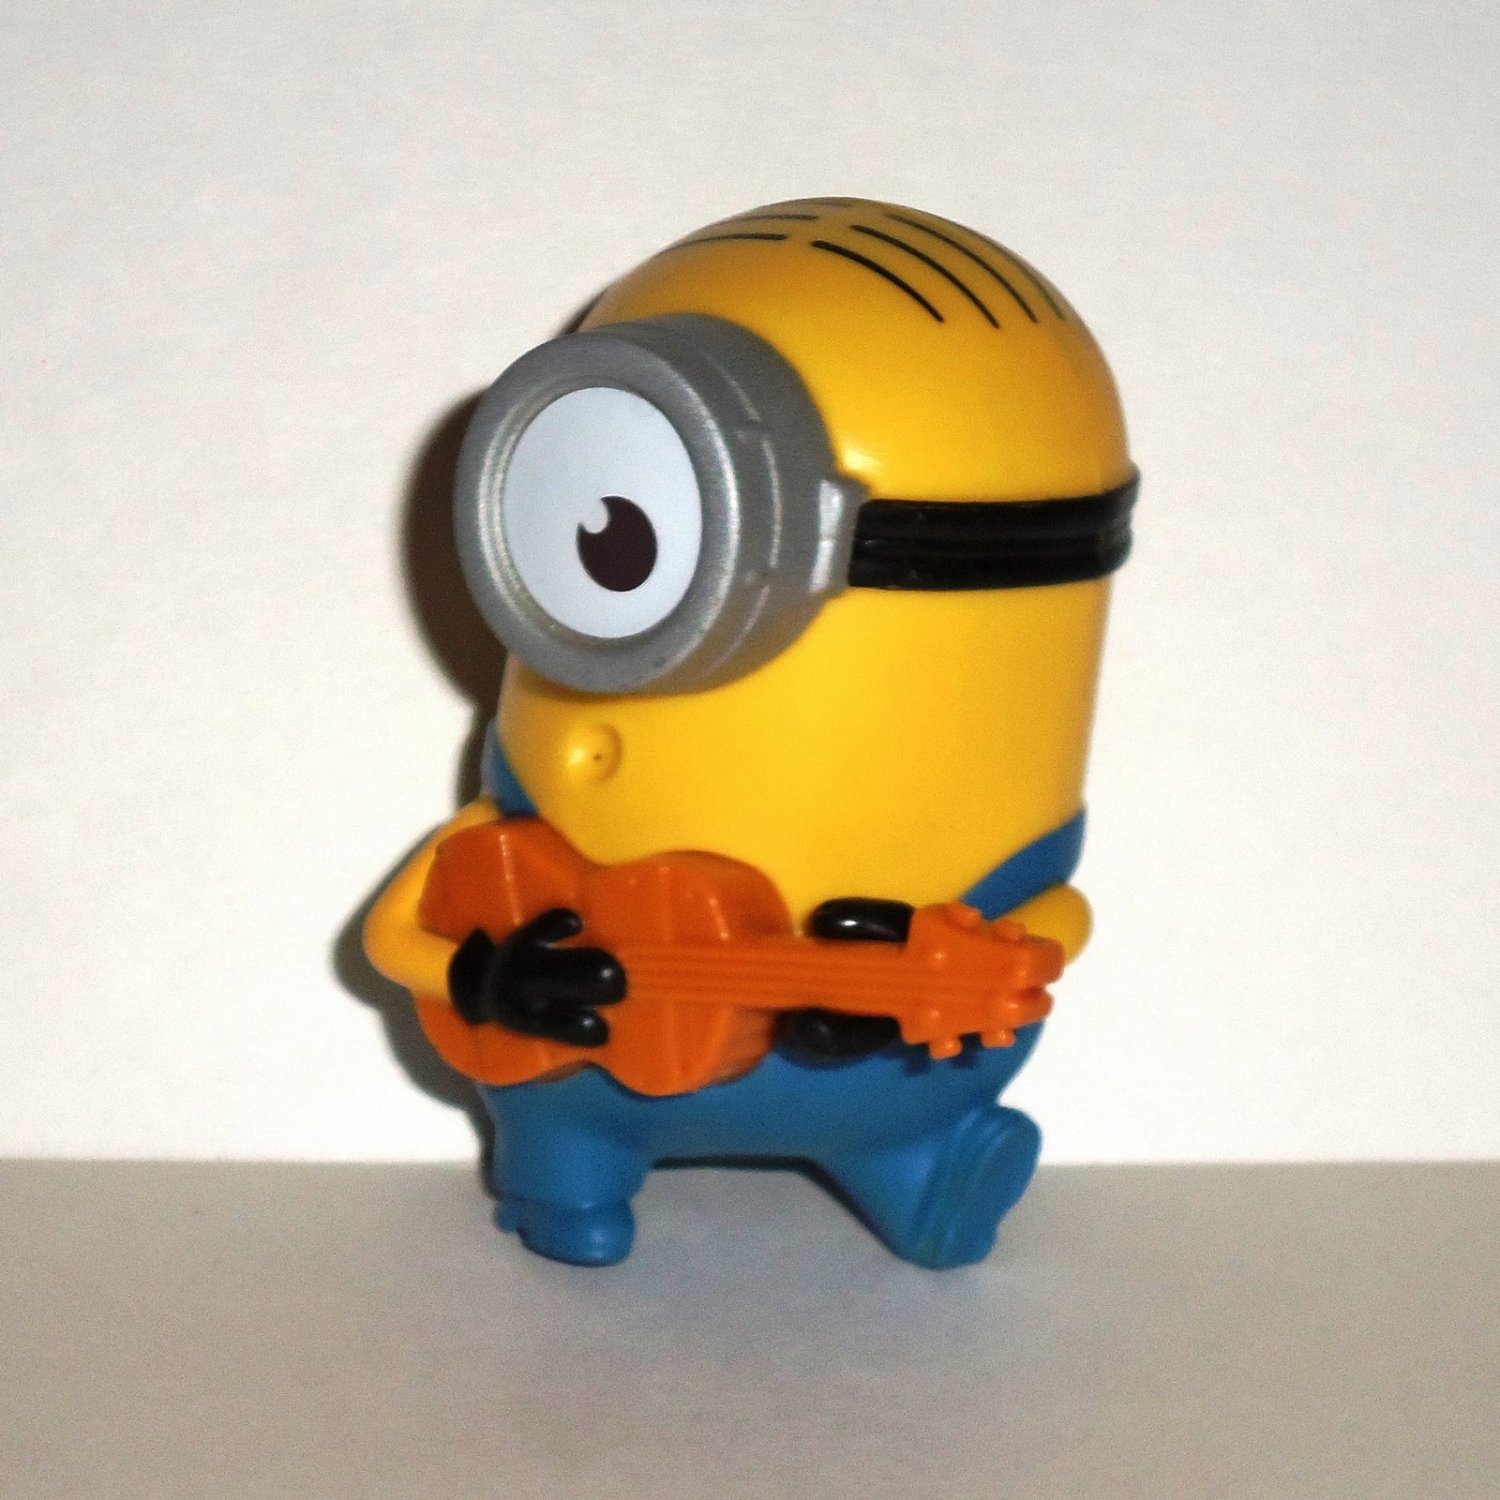 Details about   unopened new McDonald Happy Meal Toy minions guitar strumming stuart 2015 